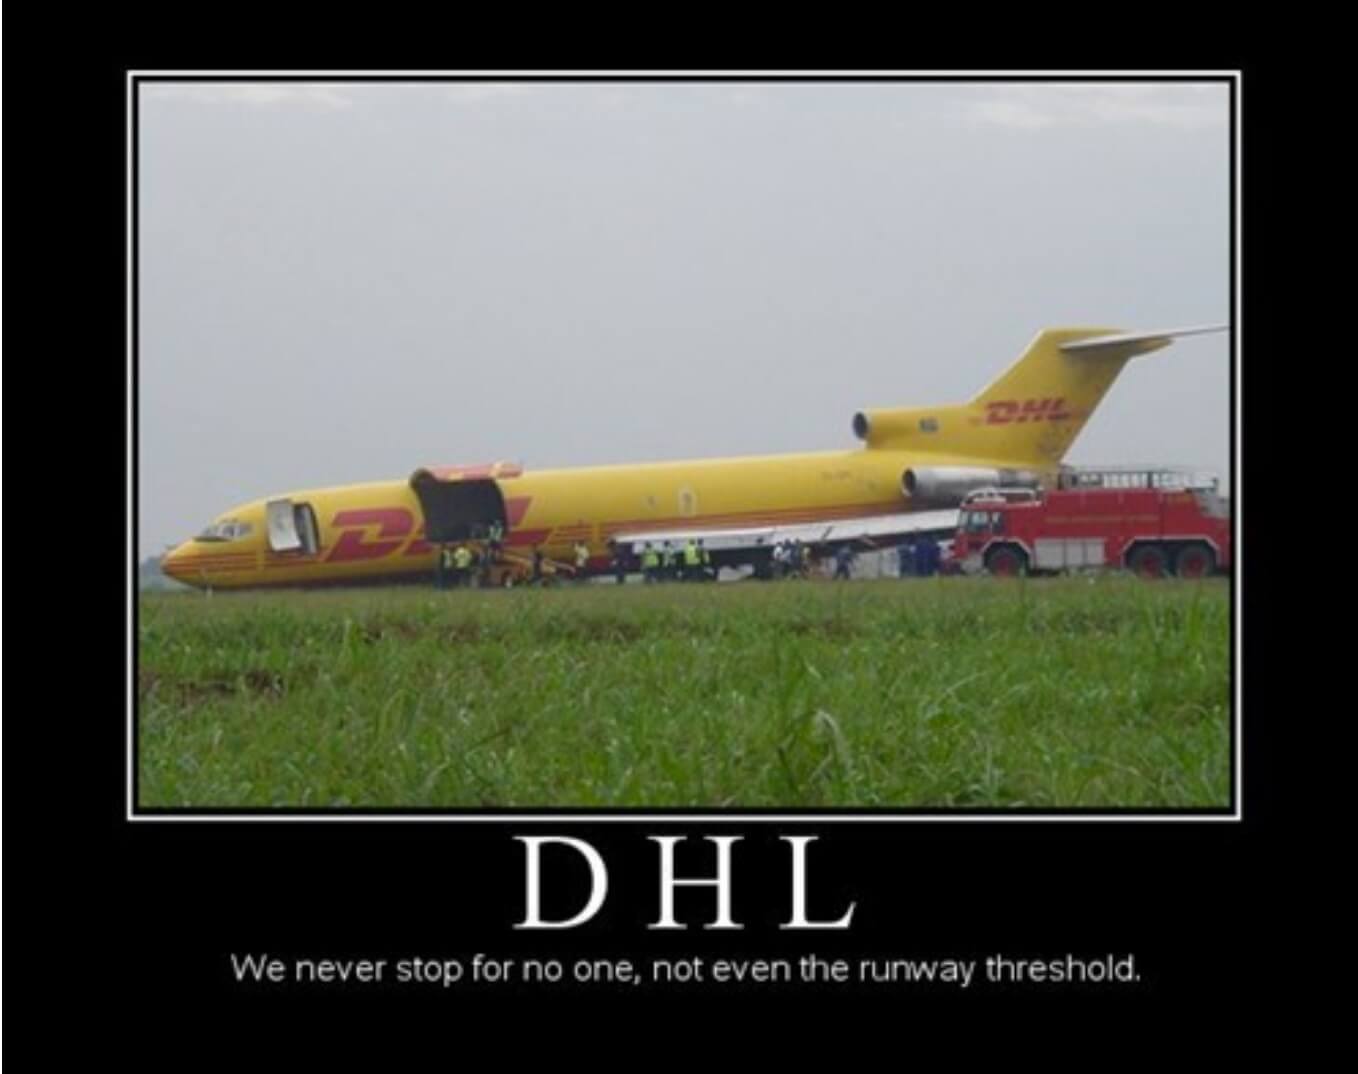 Dhl Accident Attorneys Personal Injury Claims Against Dhl Delivery Trucks Ehline Law Firm